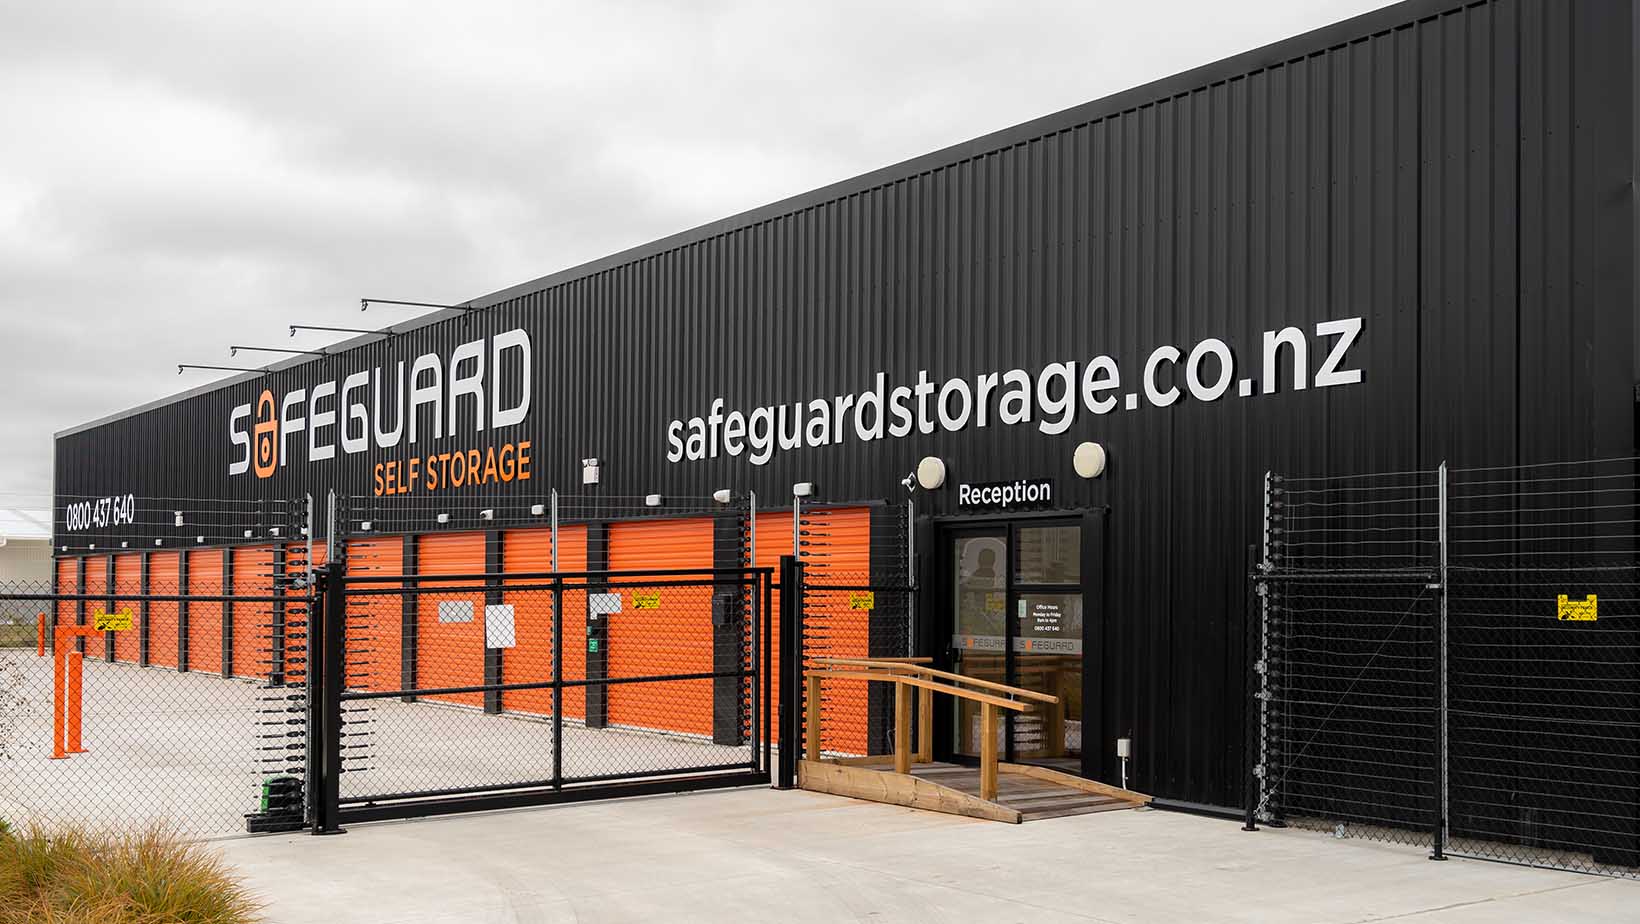 Storage solutions for your home using Safeguard Storage.